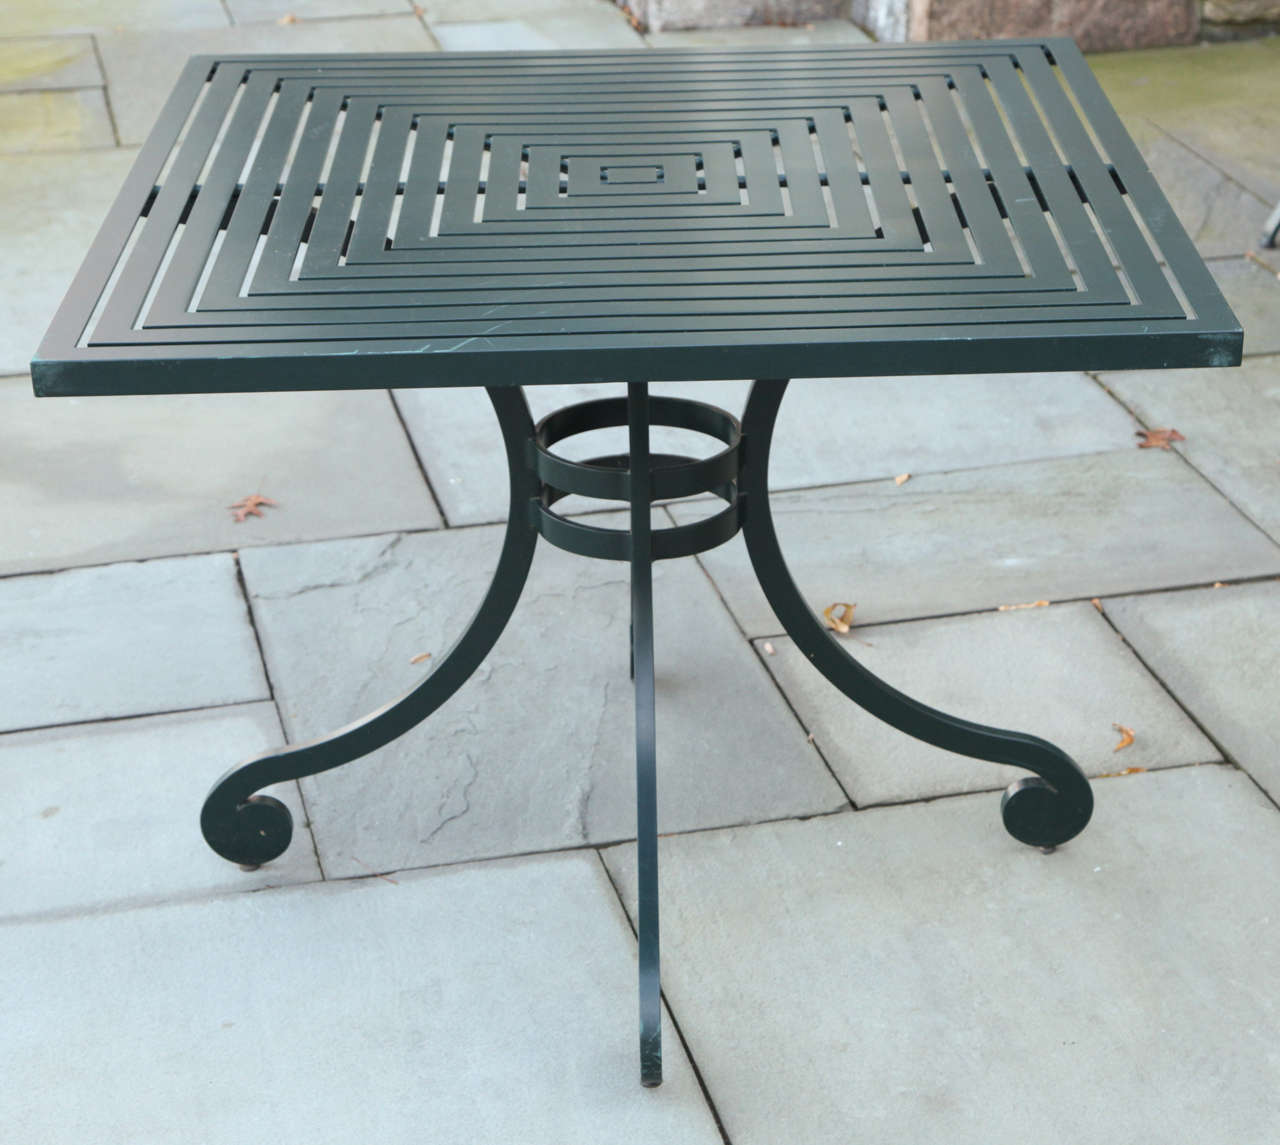 With Adam-style stop.  Handcrafted in dark green powder-coated aluminum by McKinnon and Harris of Virginia.  Three available.  Can be used together to form longer dining tables.  Note there are some scratches to tops.